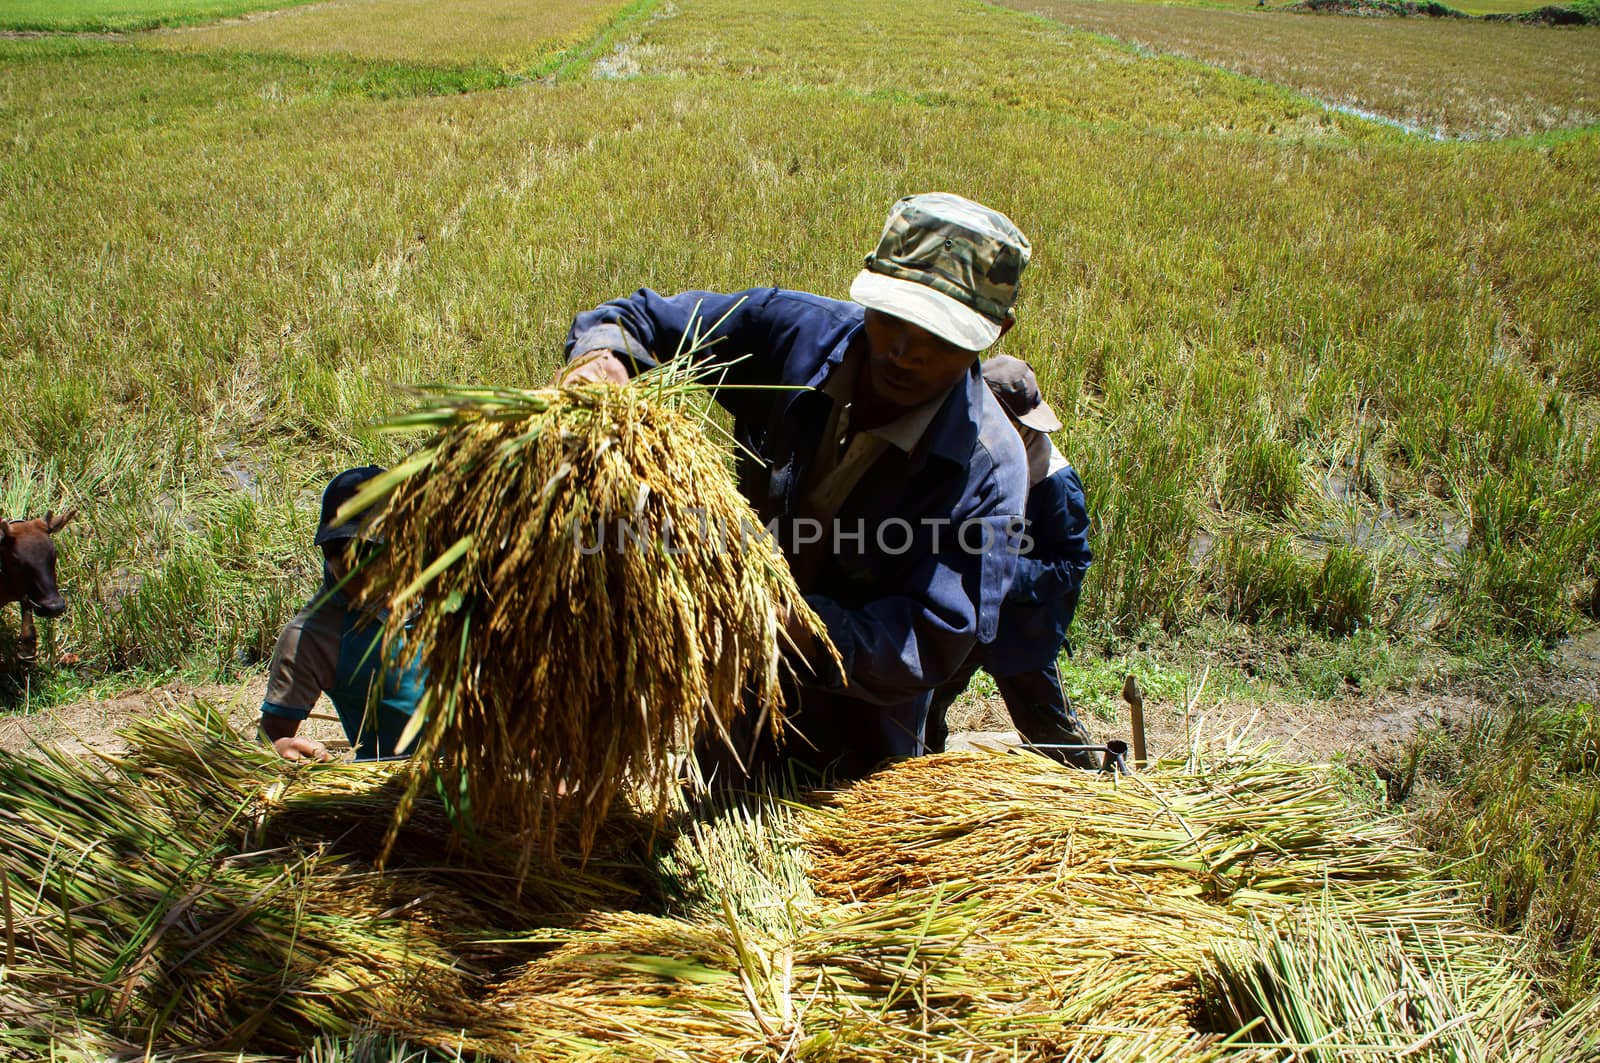 VIET NAM, ASIA - SEPTEMBER 03. Asia farmer harvest paddy on rice field,  bunch of ripe rice let in heap, a main crop more abundant than usual for comfortable life in VietNam, Asia- September 03, 2013